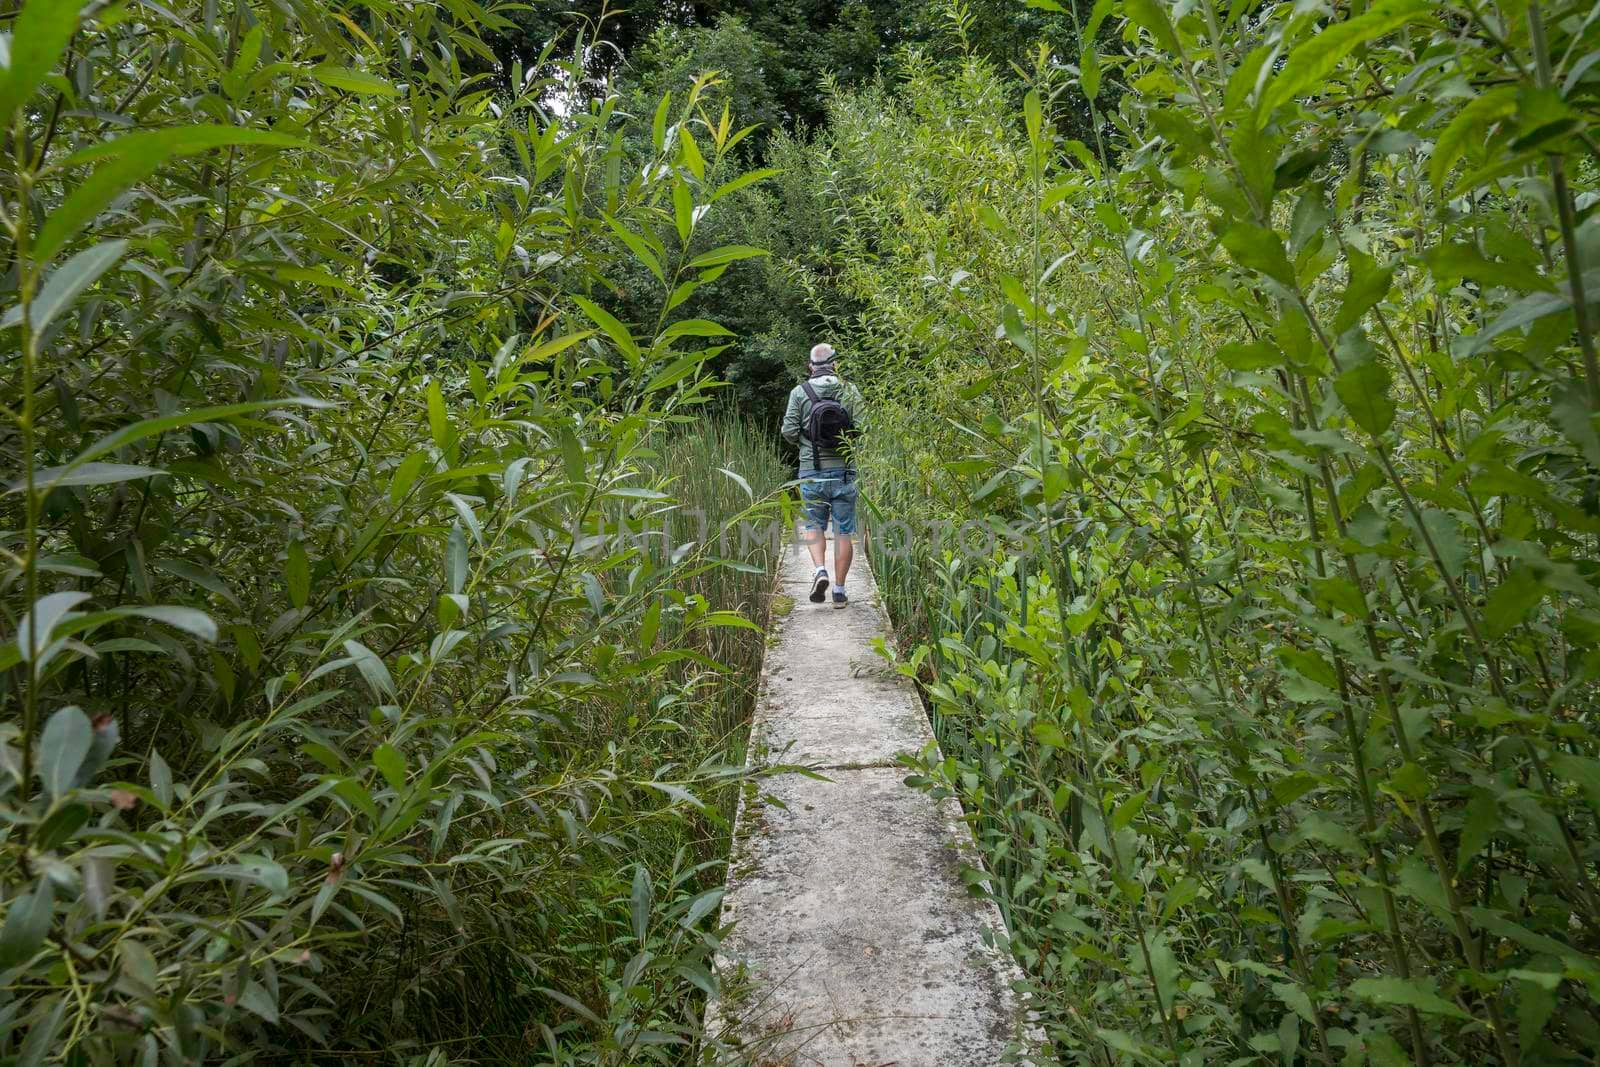 adult man with backpack takes a walk among tall green plants over a walkway in nature